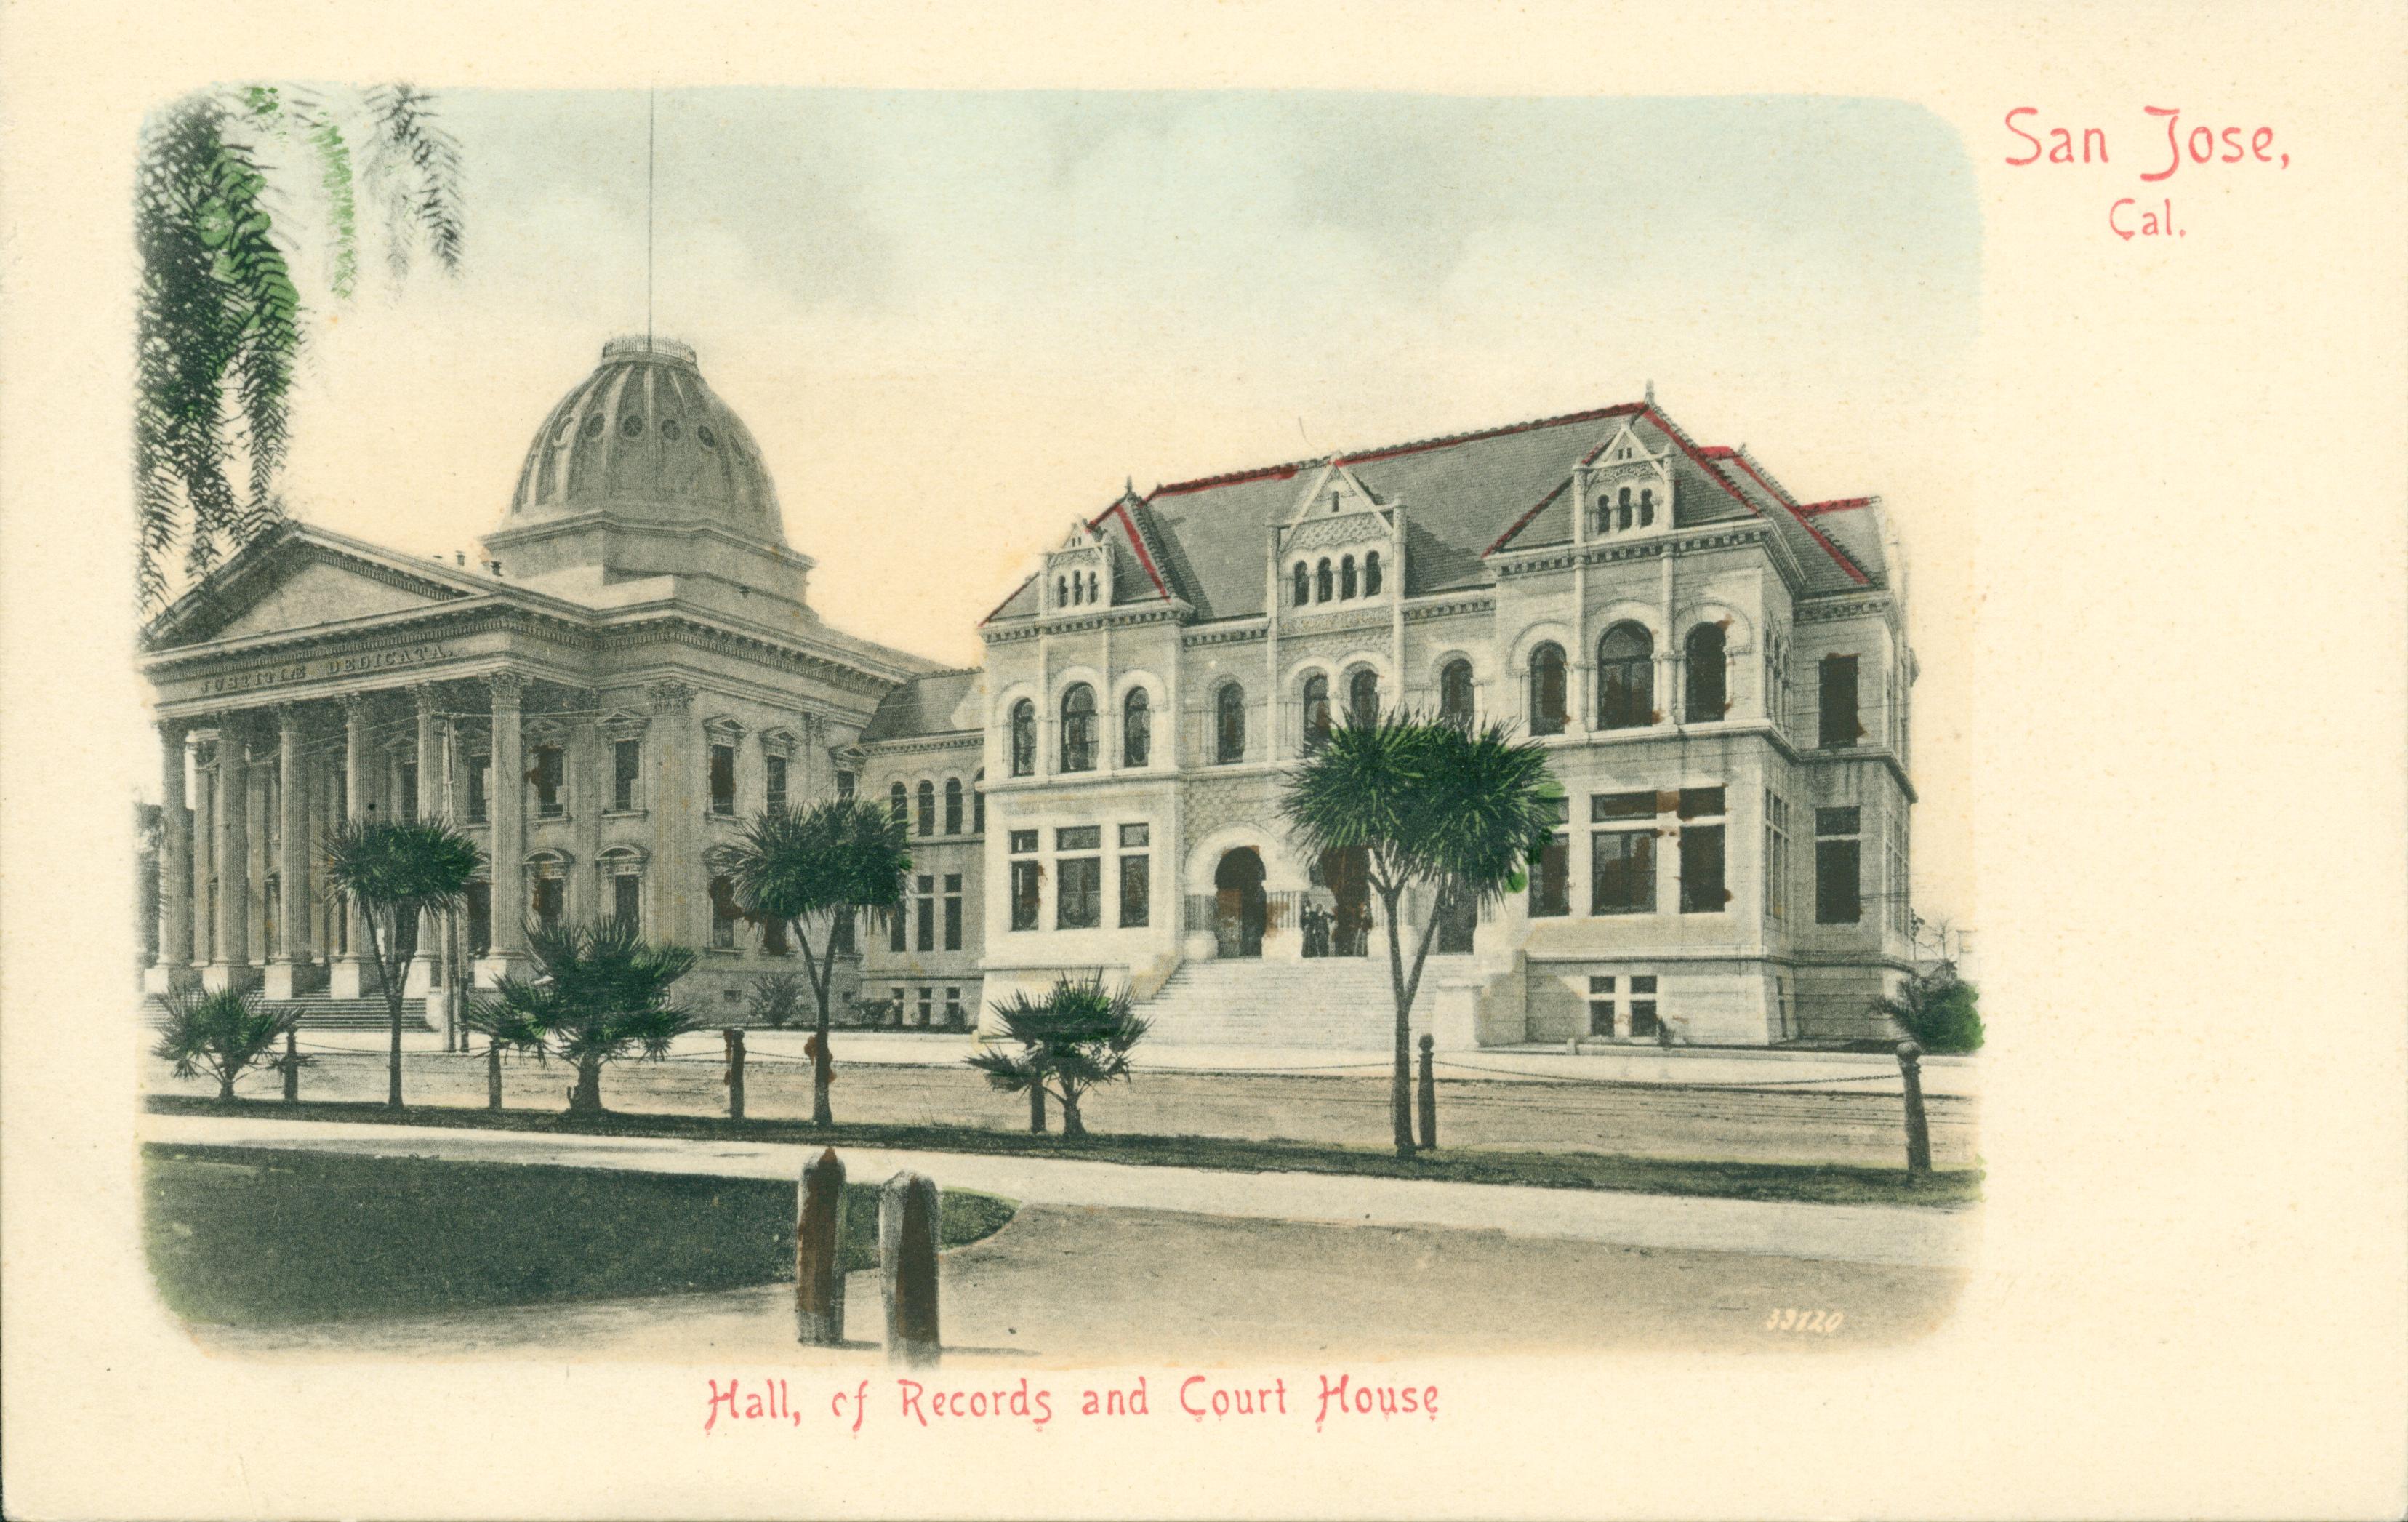 Exterior view of Court House and Hall of Records, palm trees